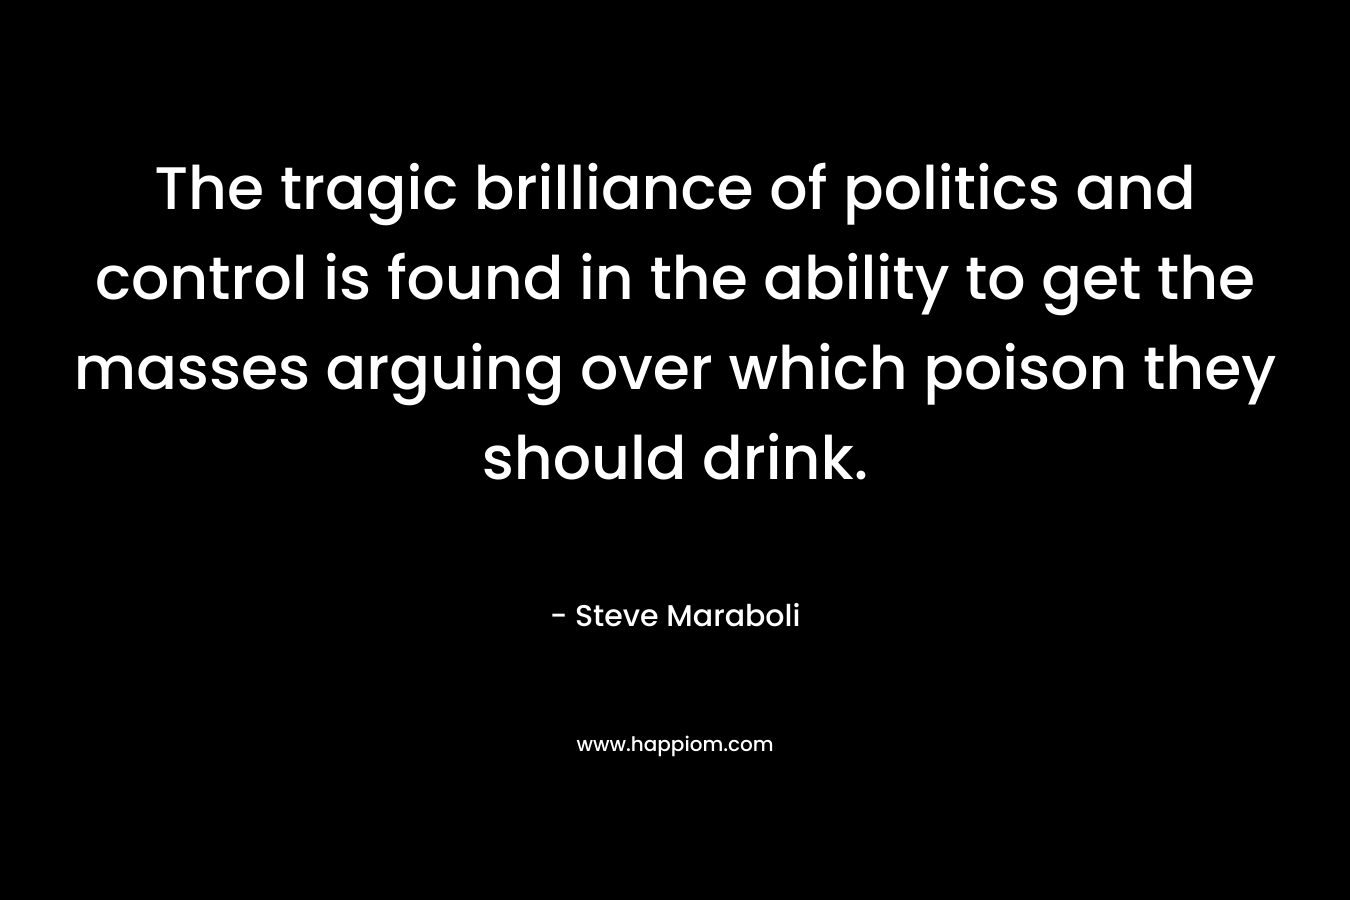 The tragic brilliance of politics and control is found in the ability to get the masses arguing over which poison they should drink.